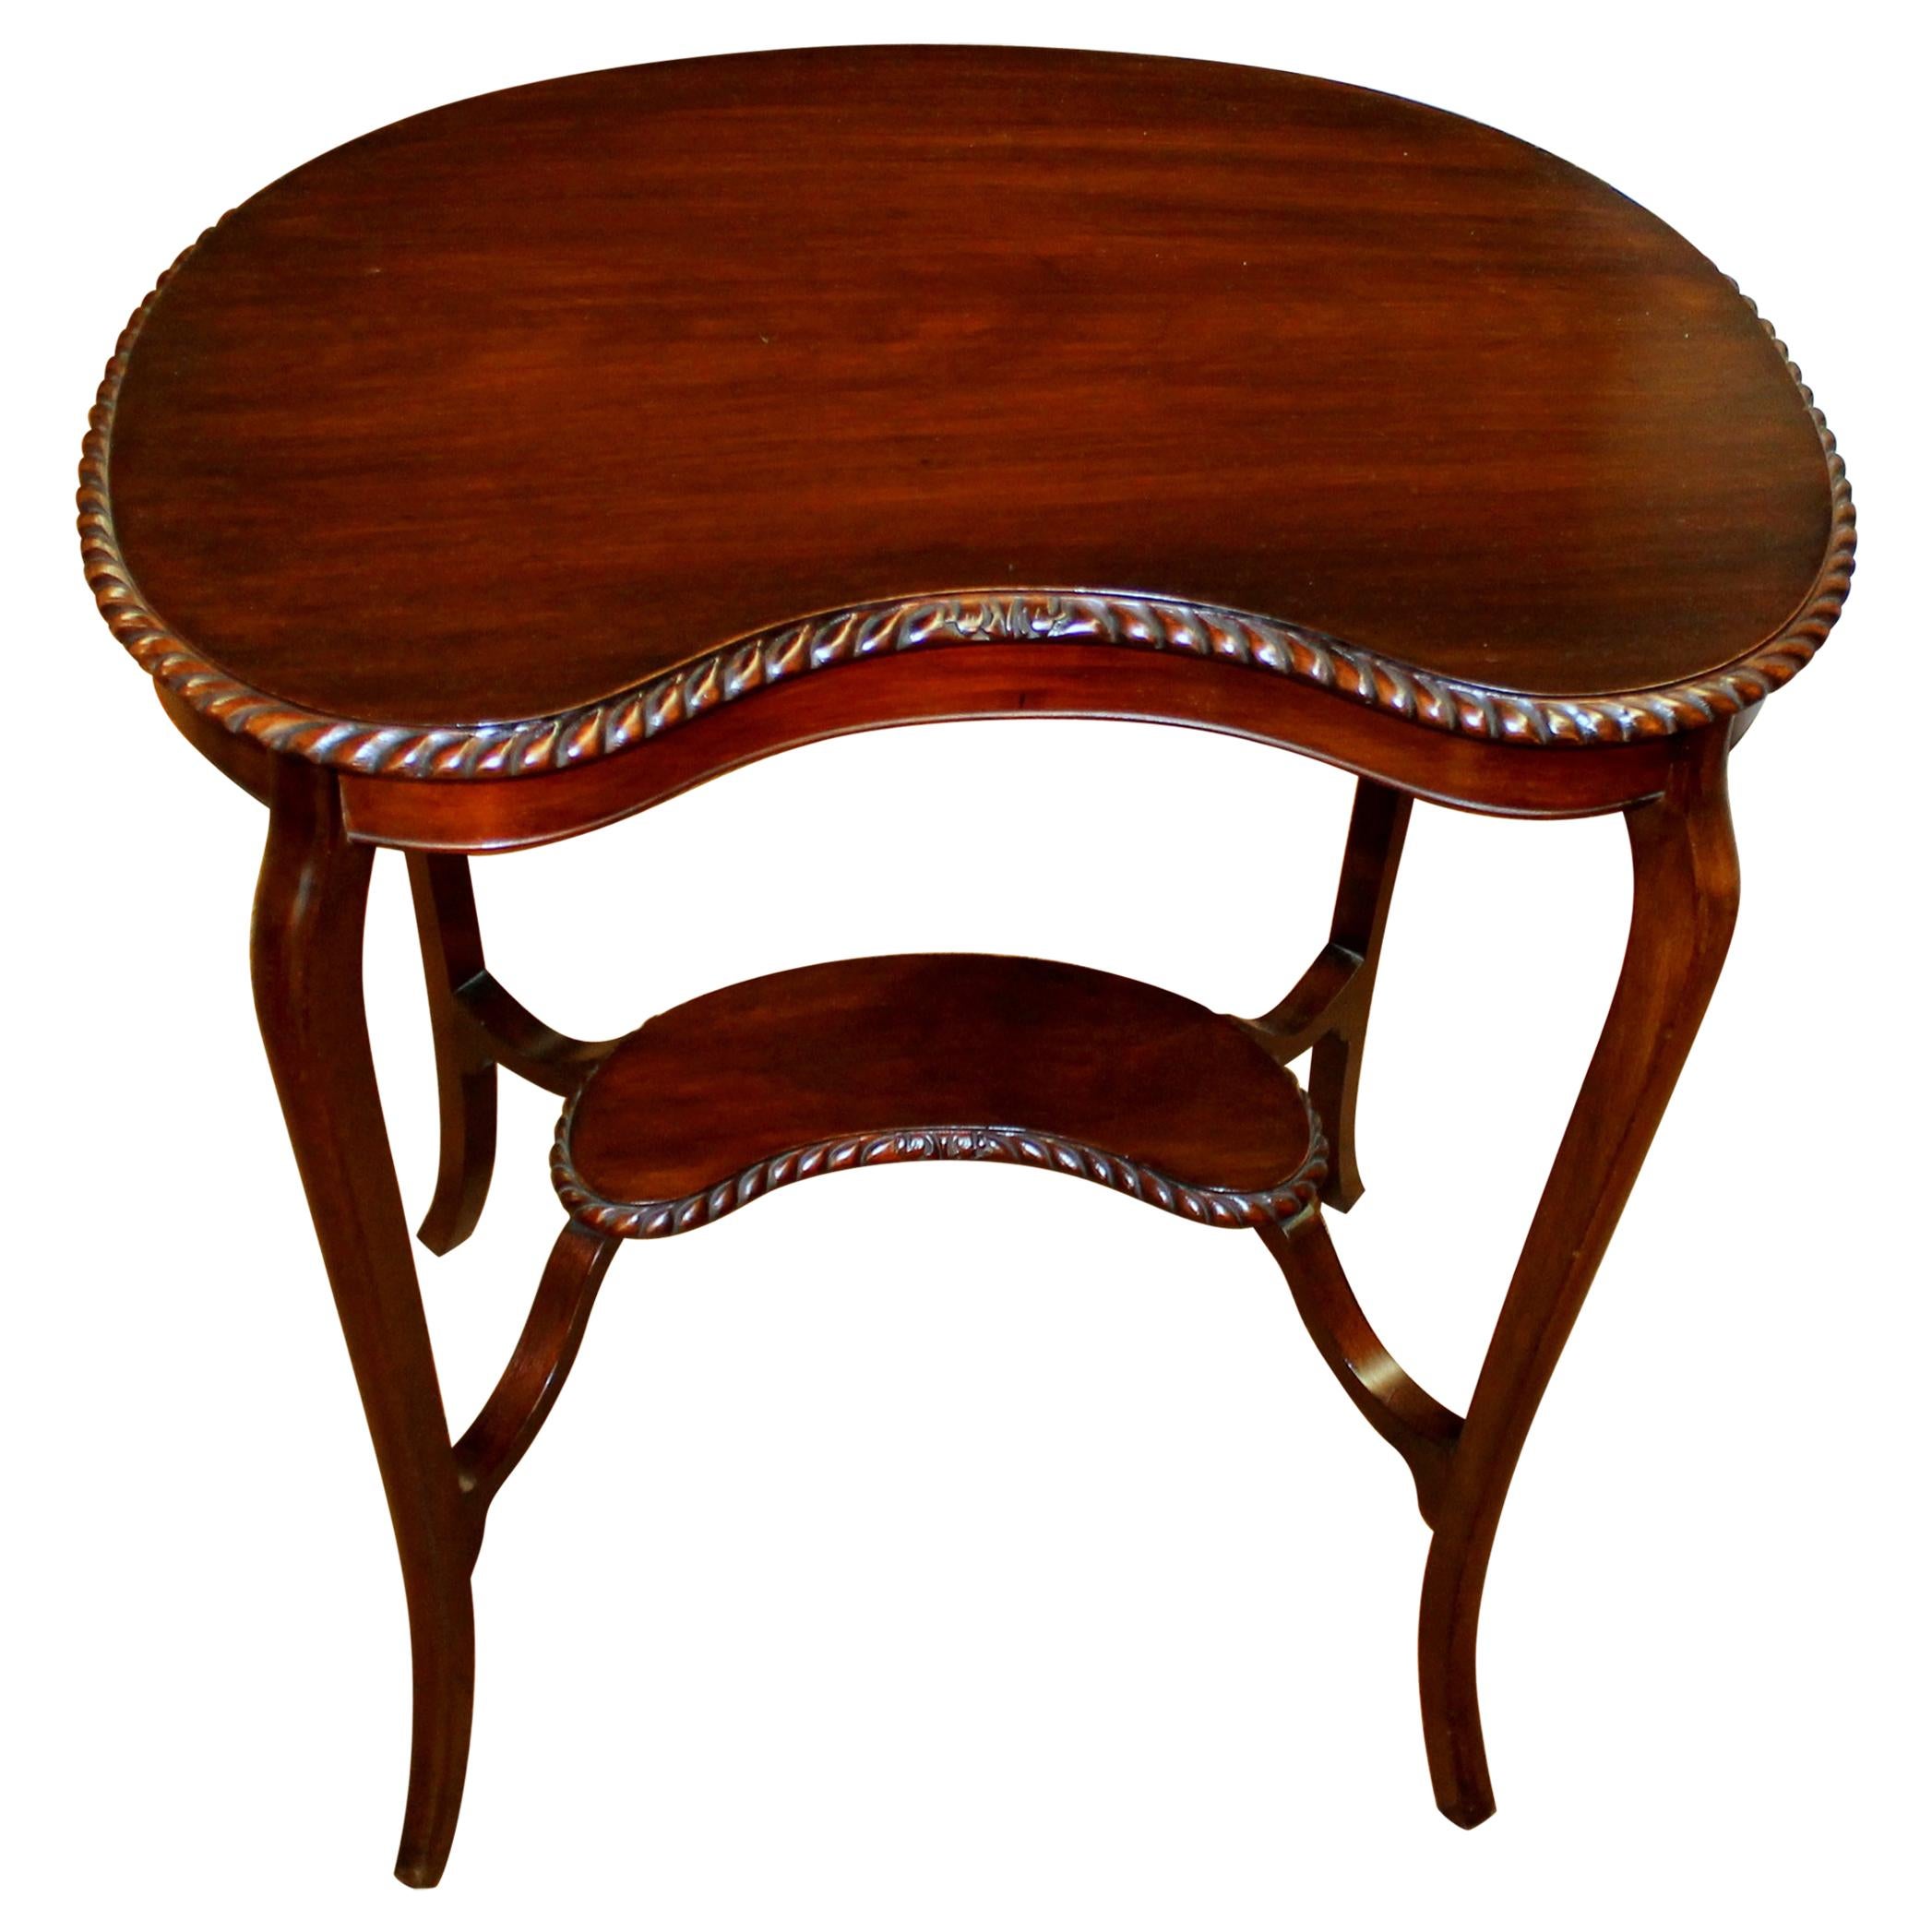 Old English Hand Carved Mahogany Gadroon Edge Kidney Shape Occasional Table